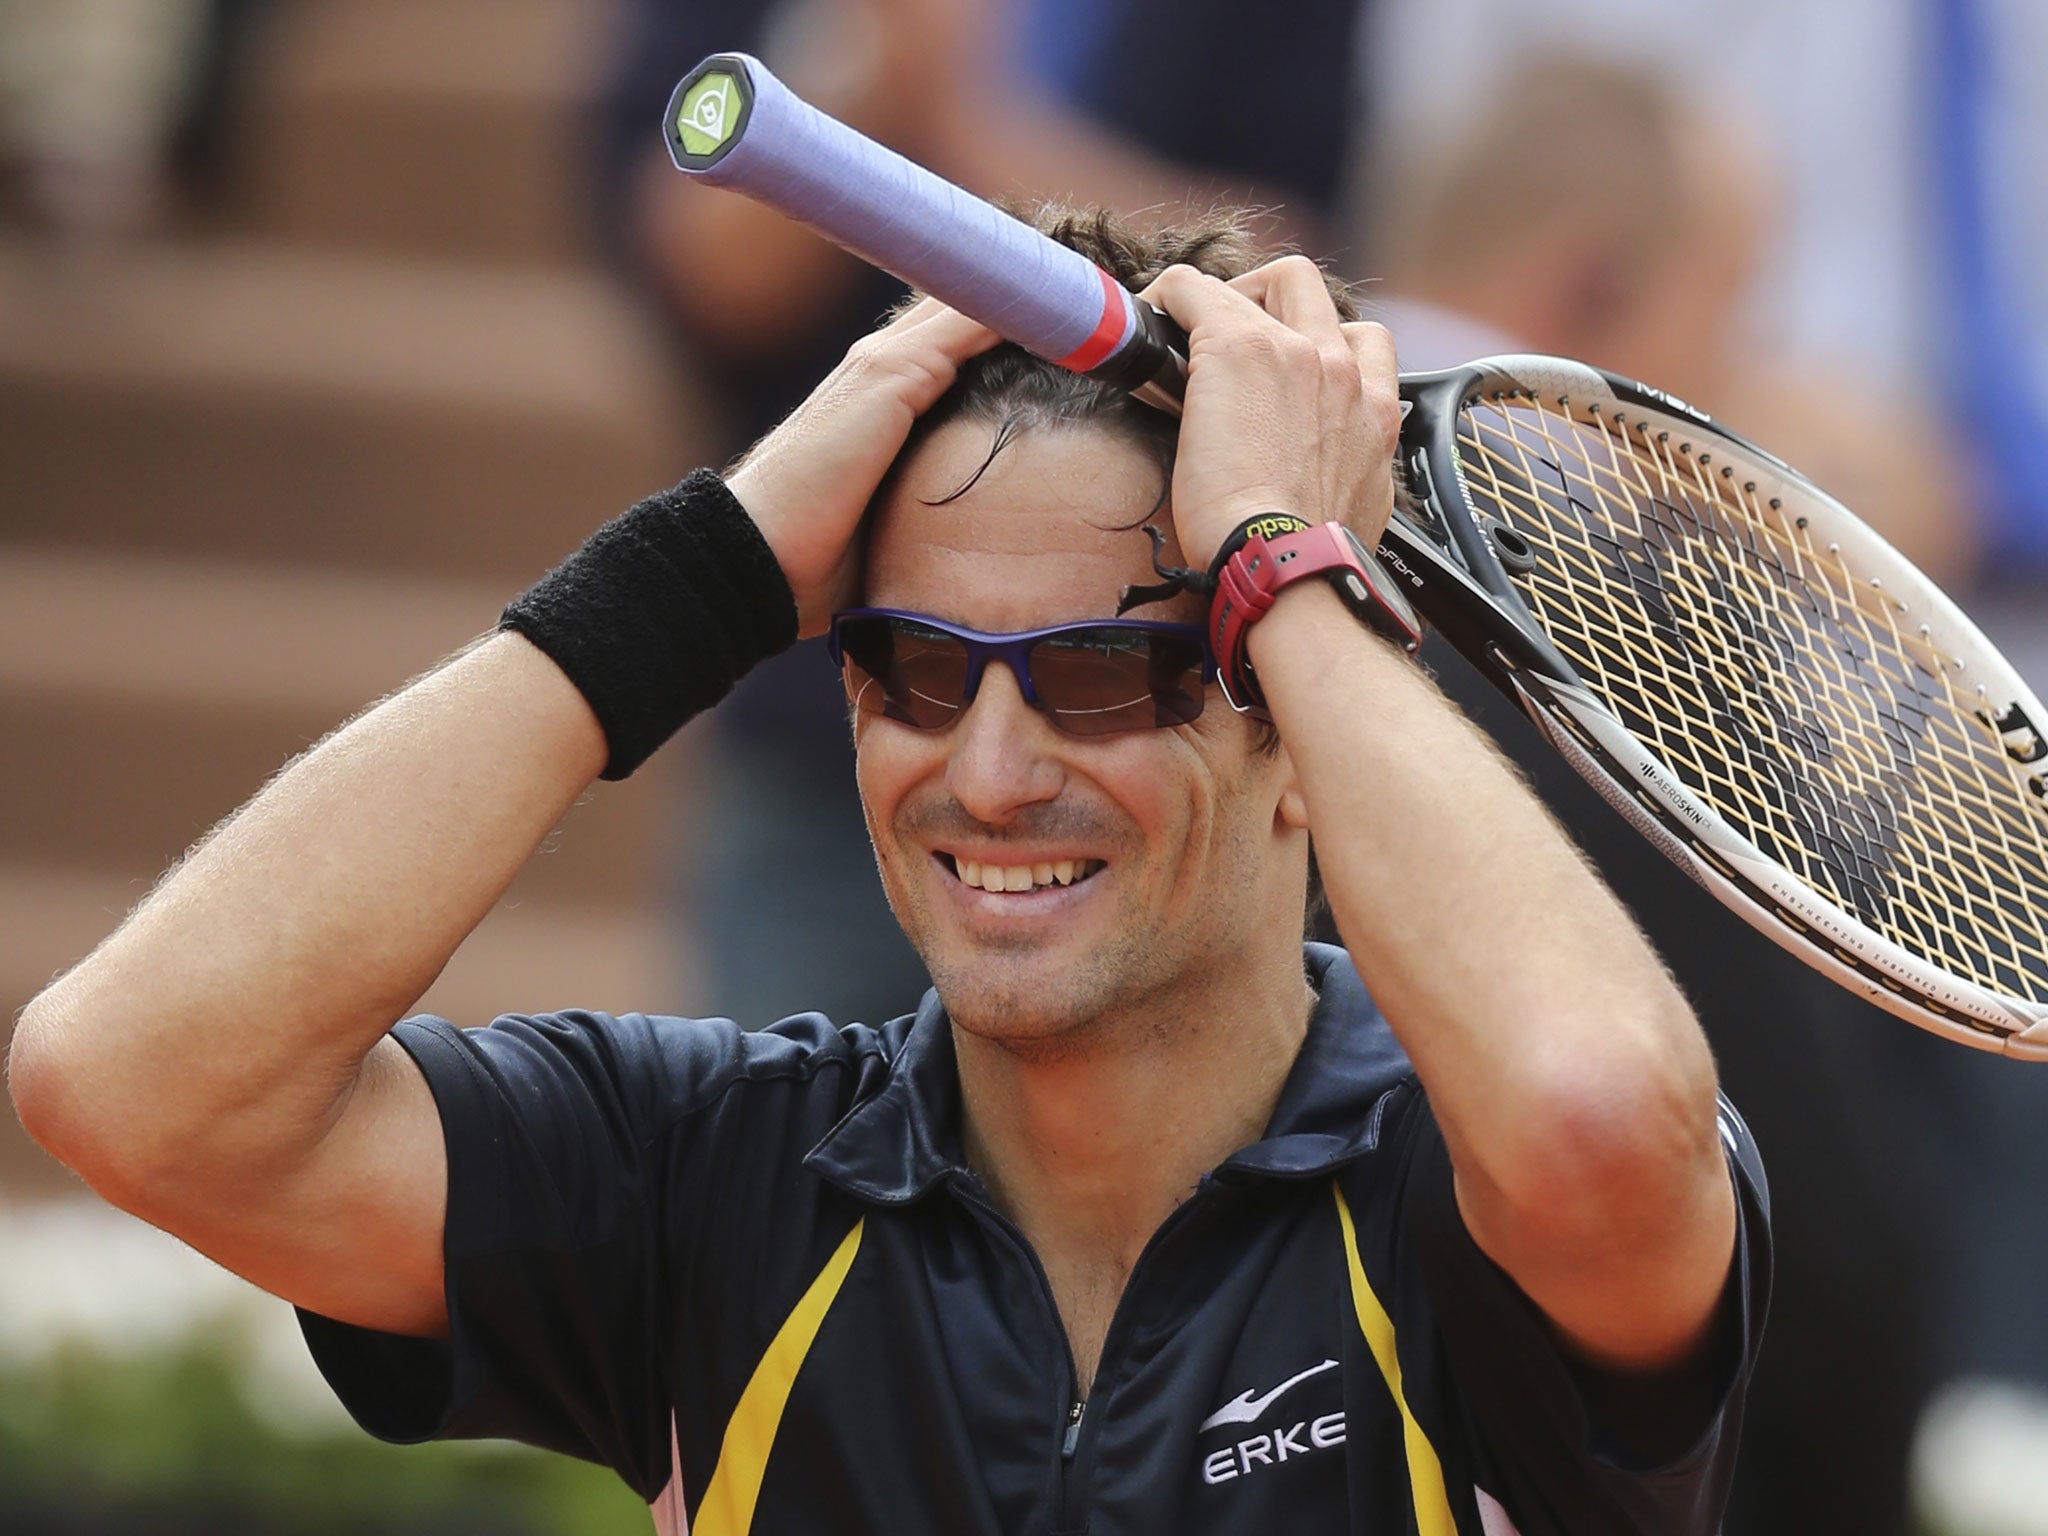 Tommy Robredo celebrates his unlikely victory